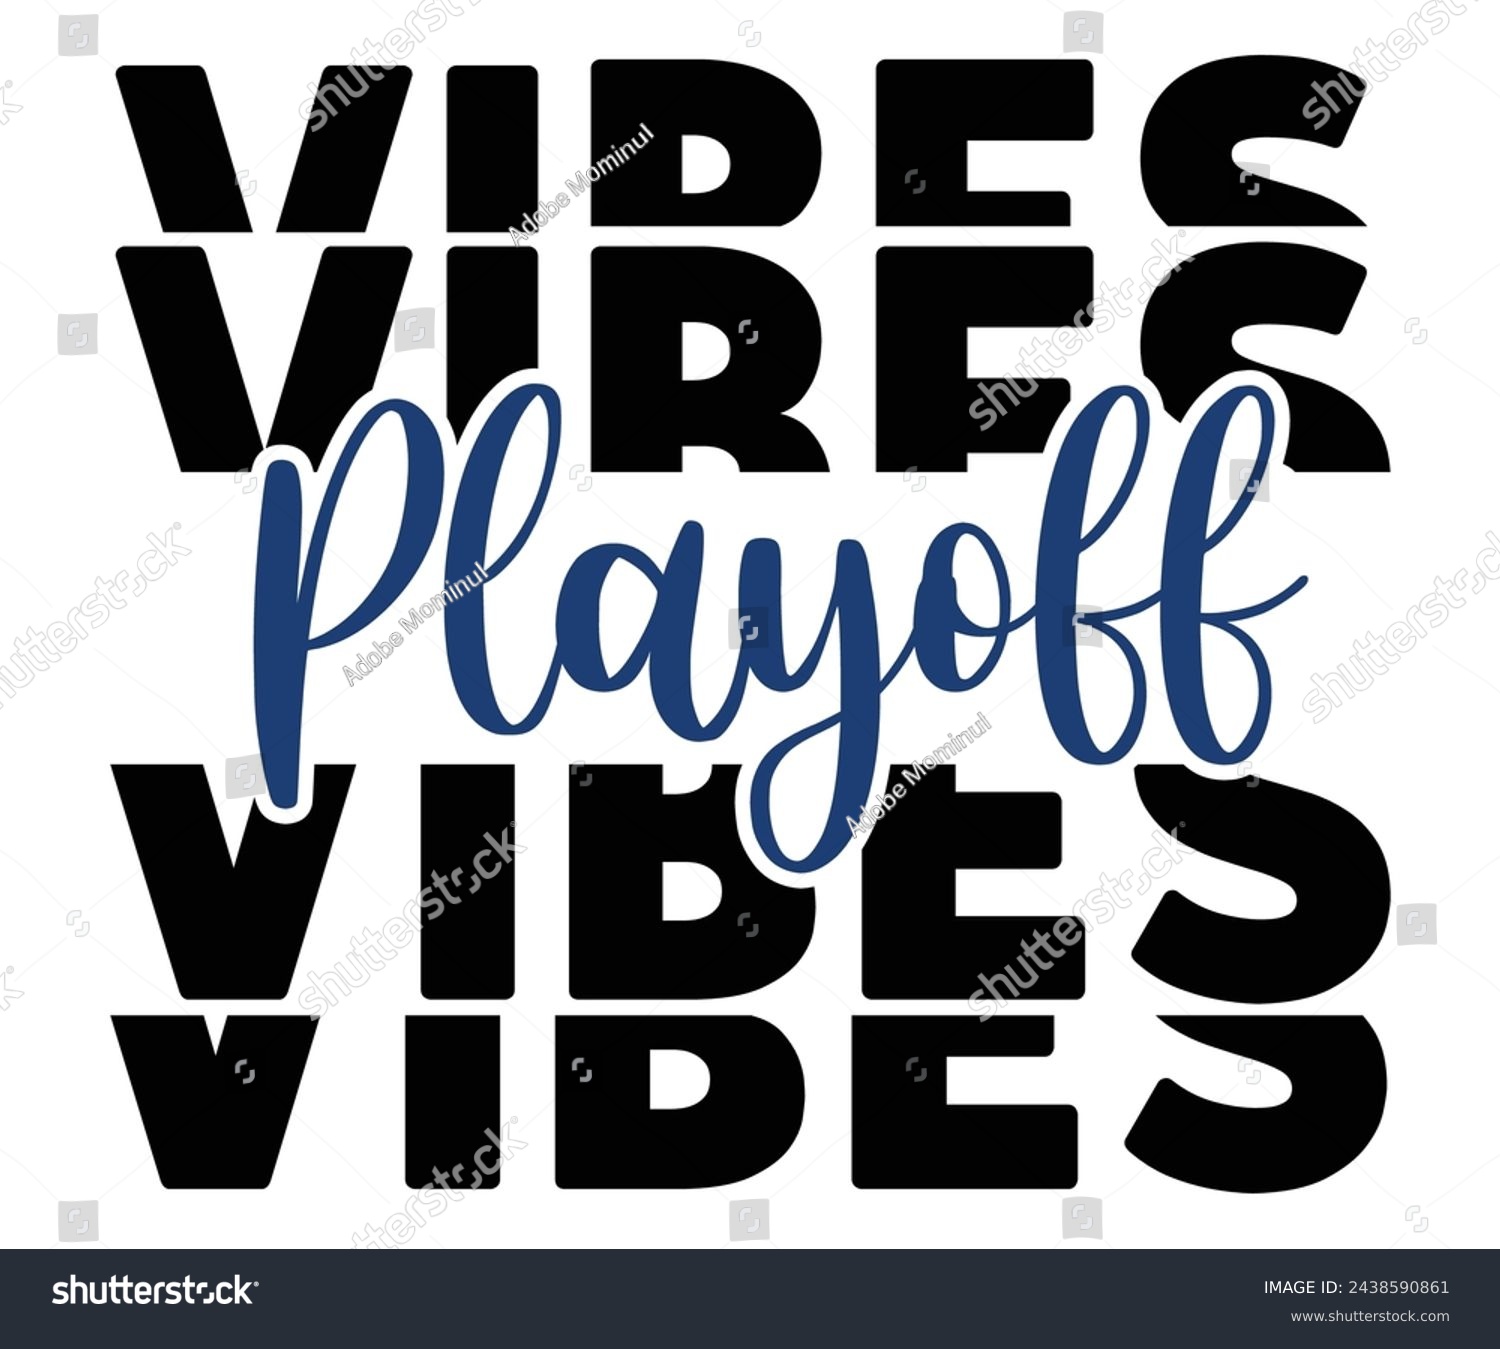 SVG of Playoff Vibes,Football Svg,Football Player Svg,Game Day Shirt,Football Quotes Svg,American Football Svg,Soccer Svg,Cut File,Commercial use svg